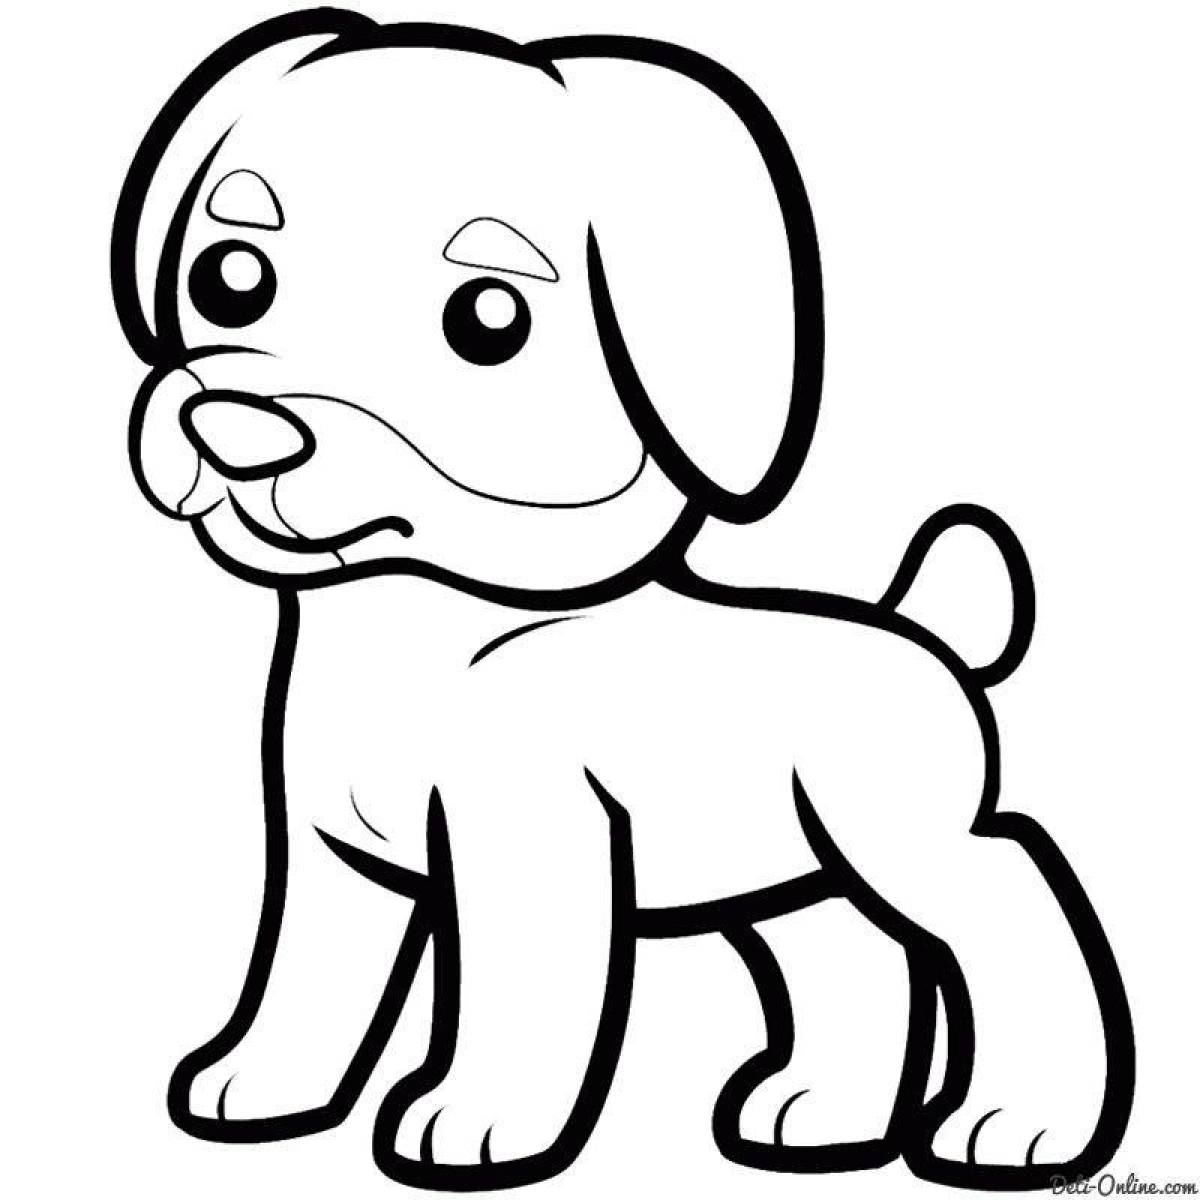 Cute baby dog ​​coloring book